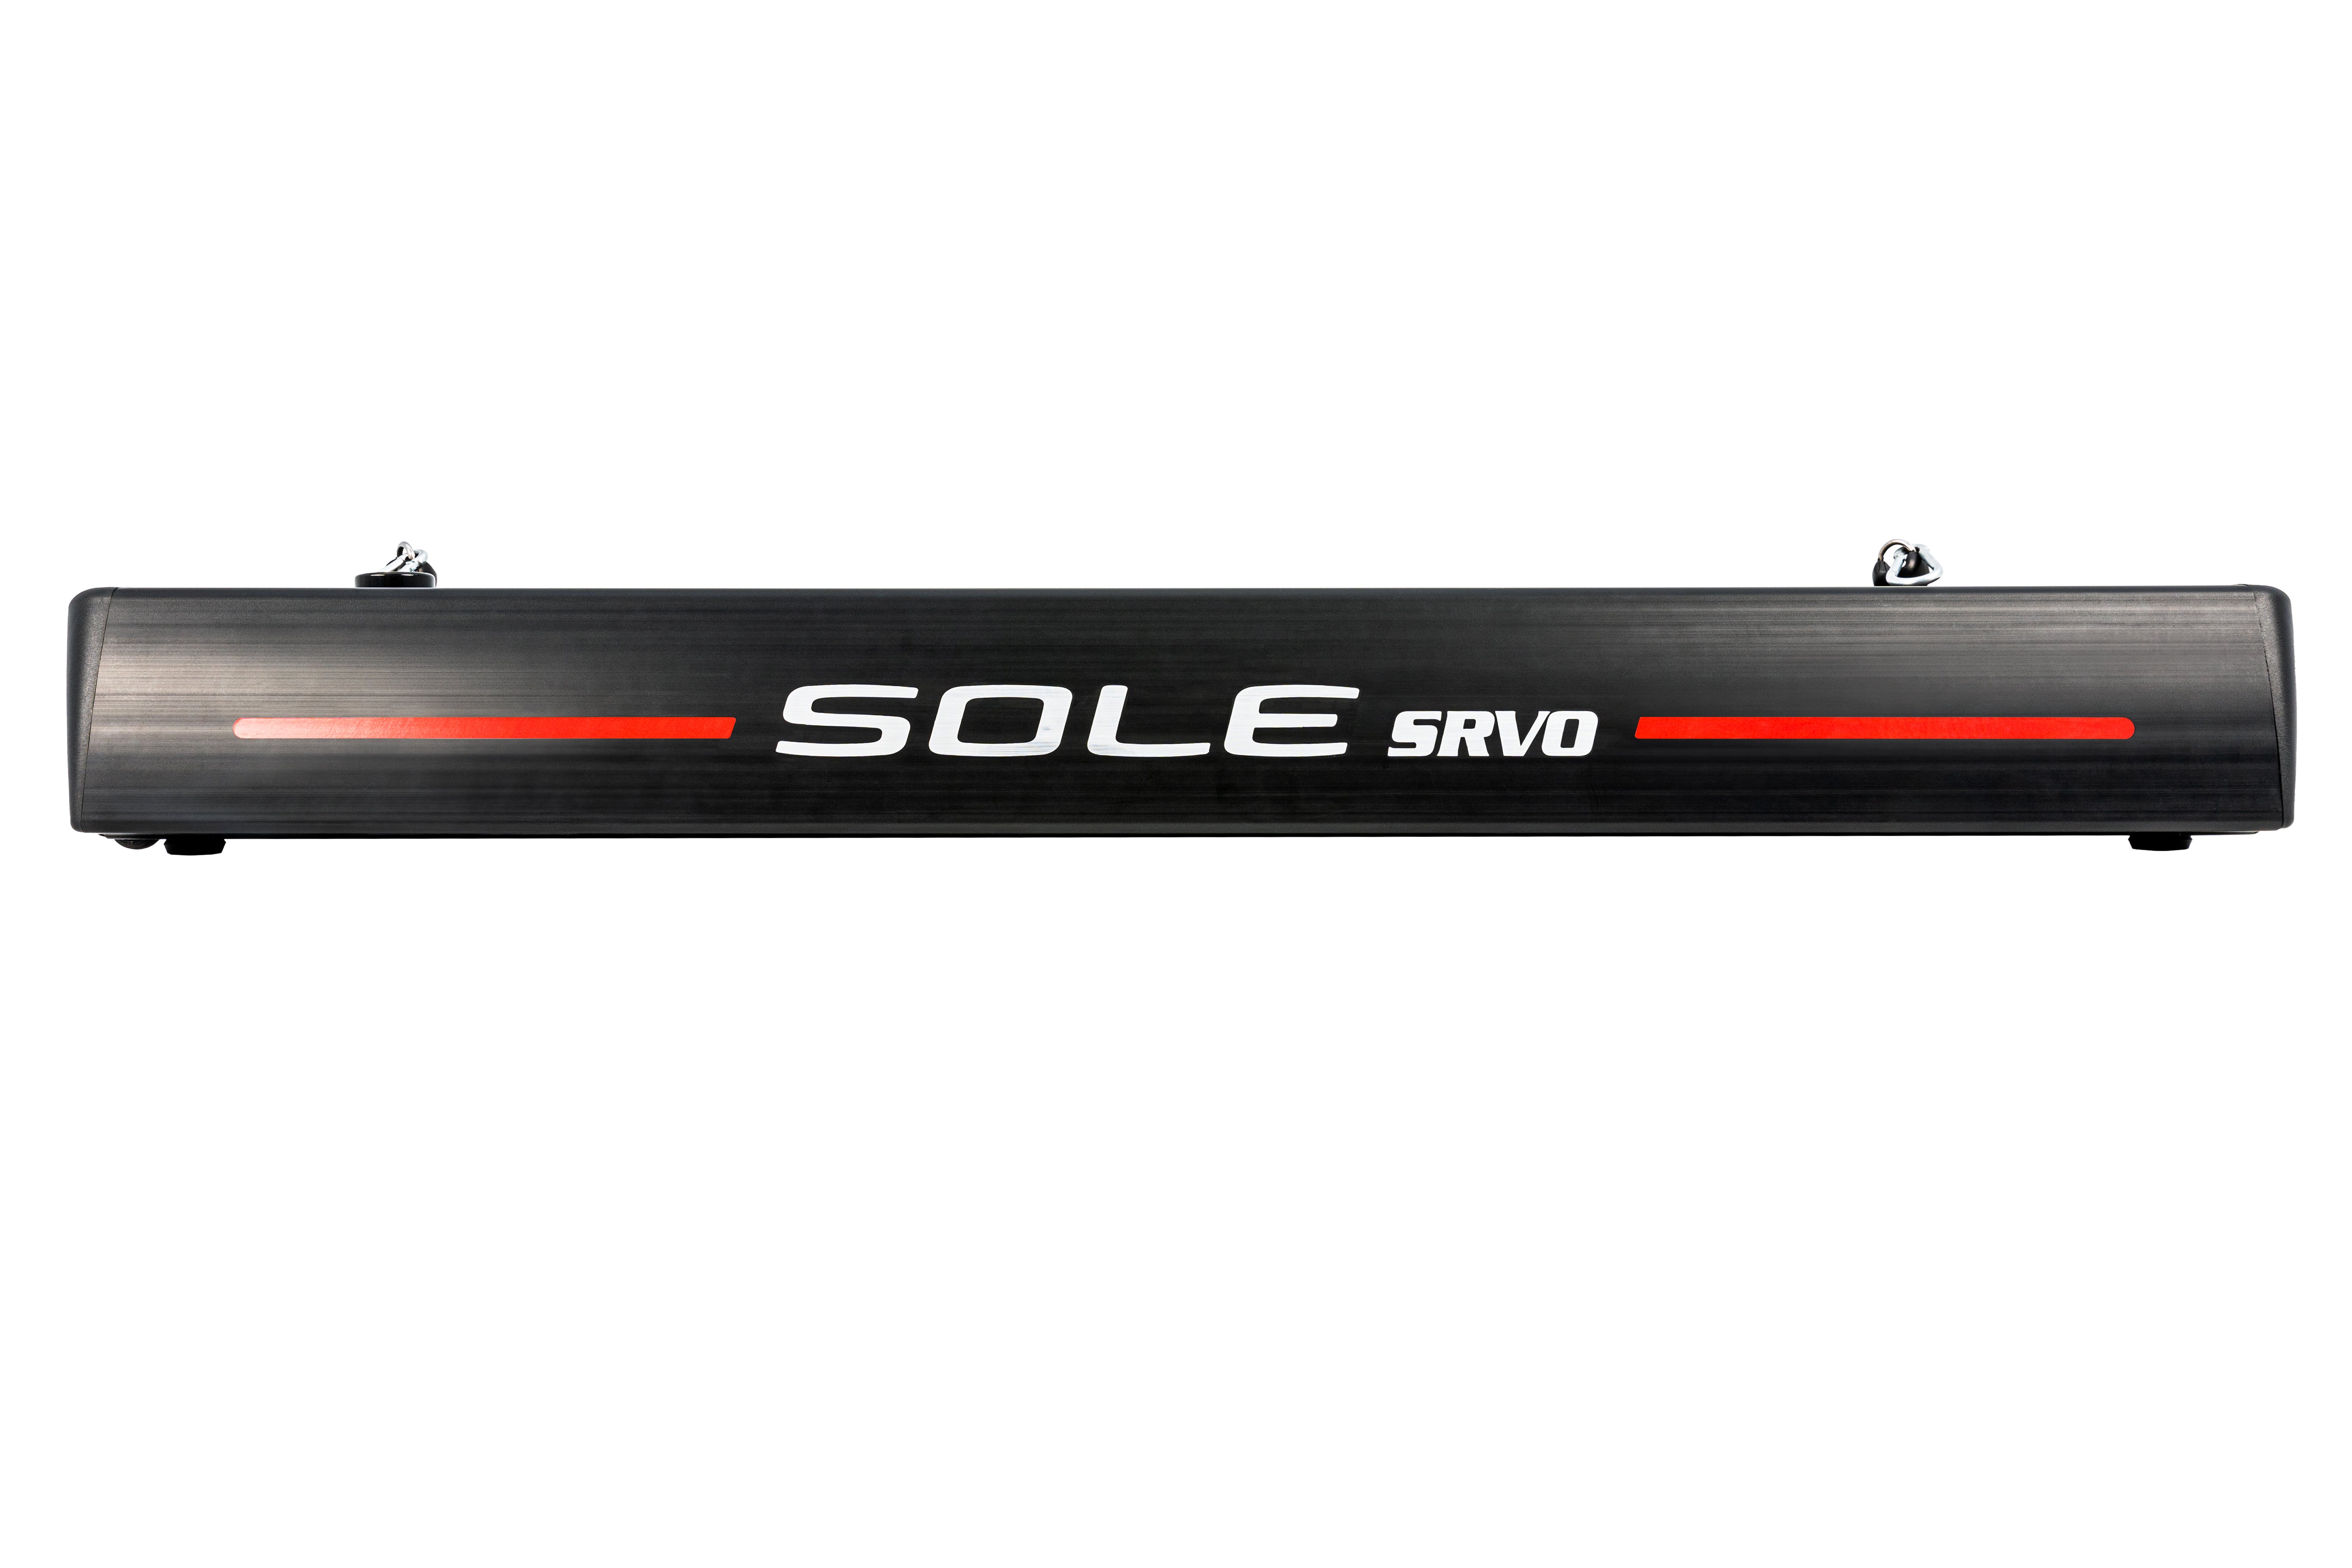 Front view of the Sole SRVO bar, displaying its sleek black design with a prominent red stripe and "SOLE SRVO" branding.